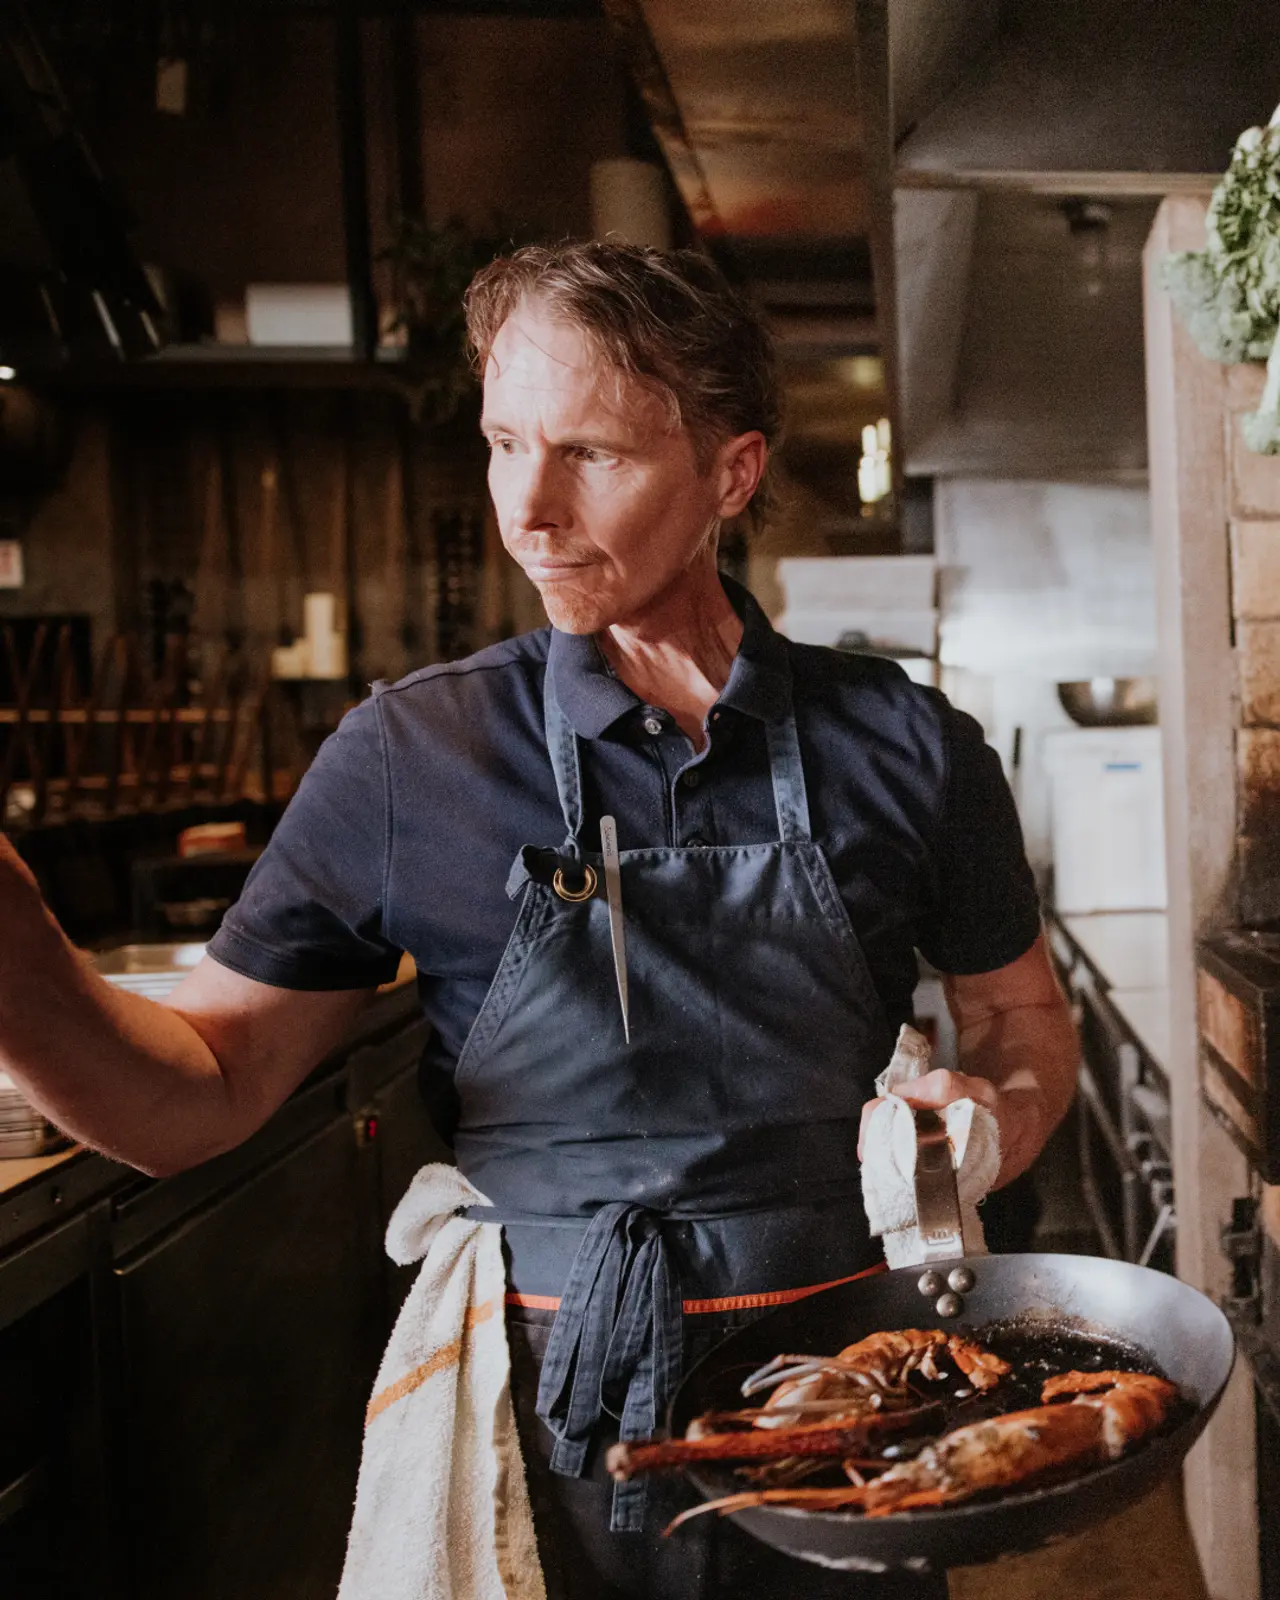 A focused chef holds a pan with lobsters inside a restaurant kitchen.